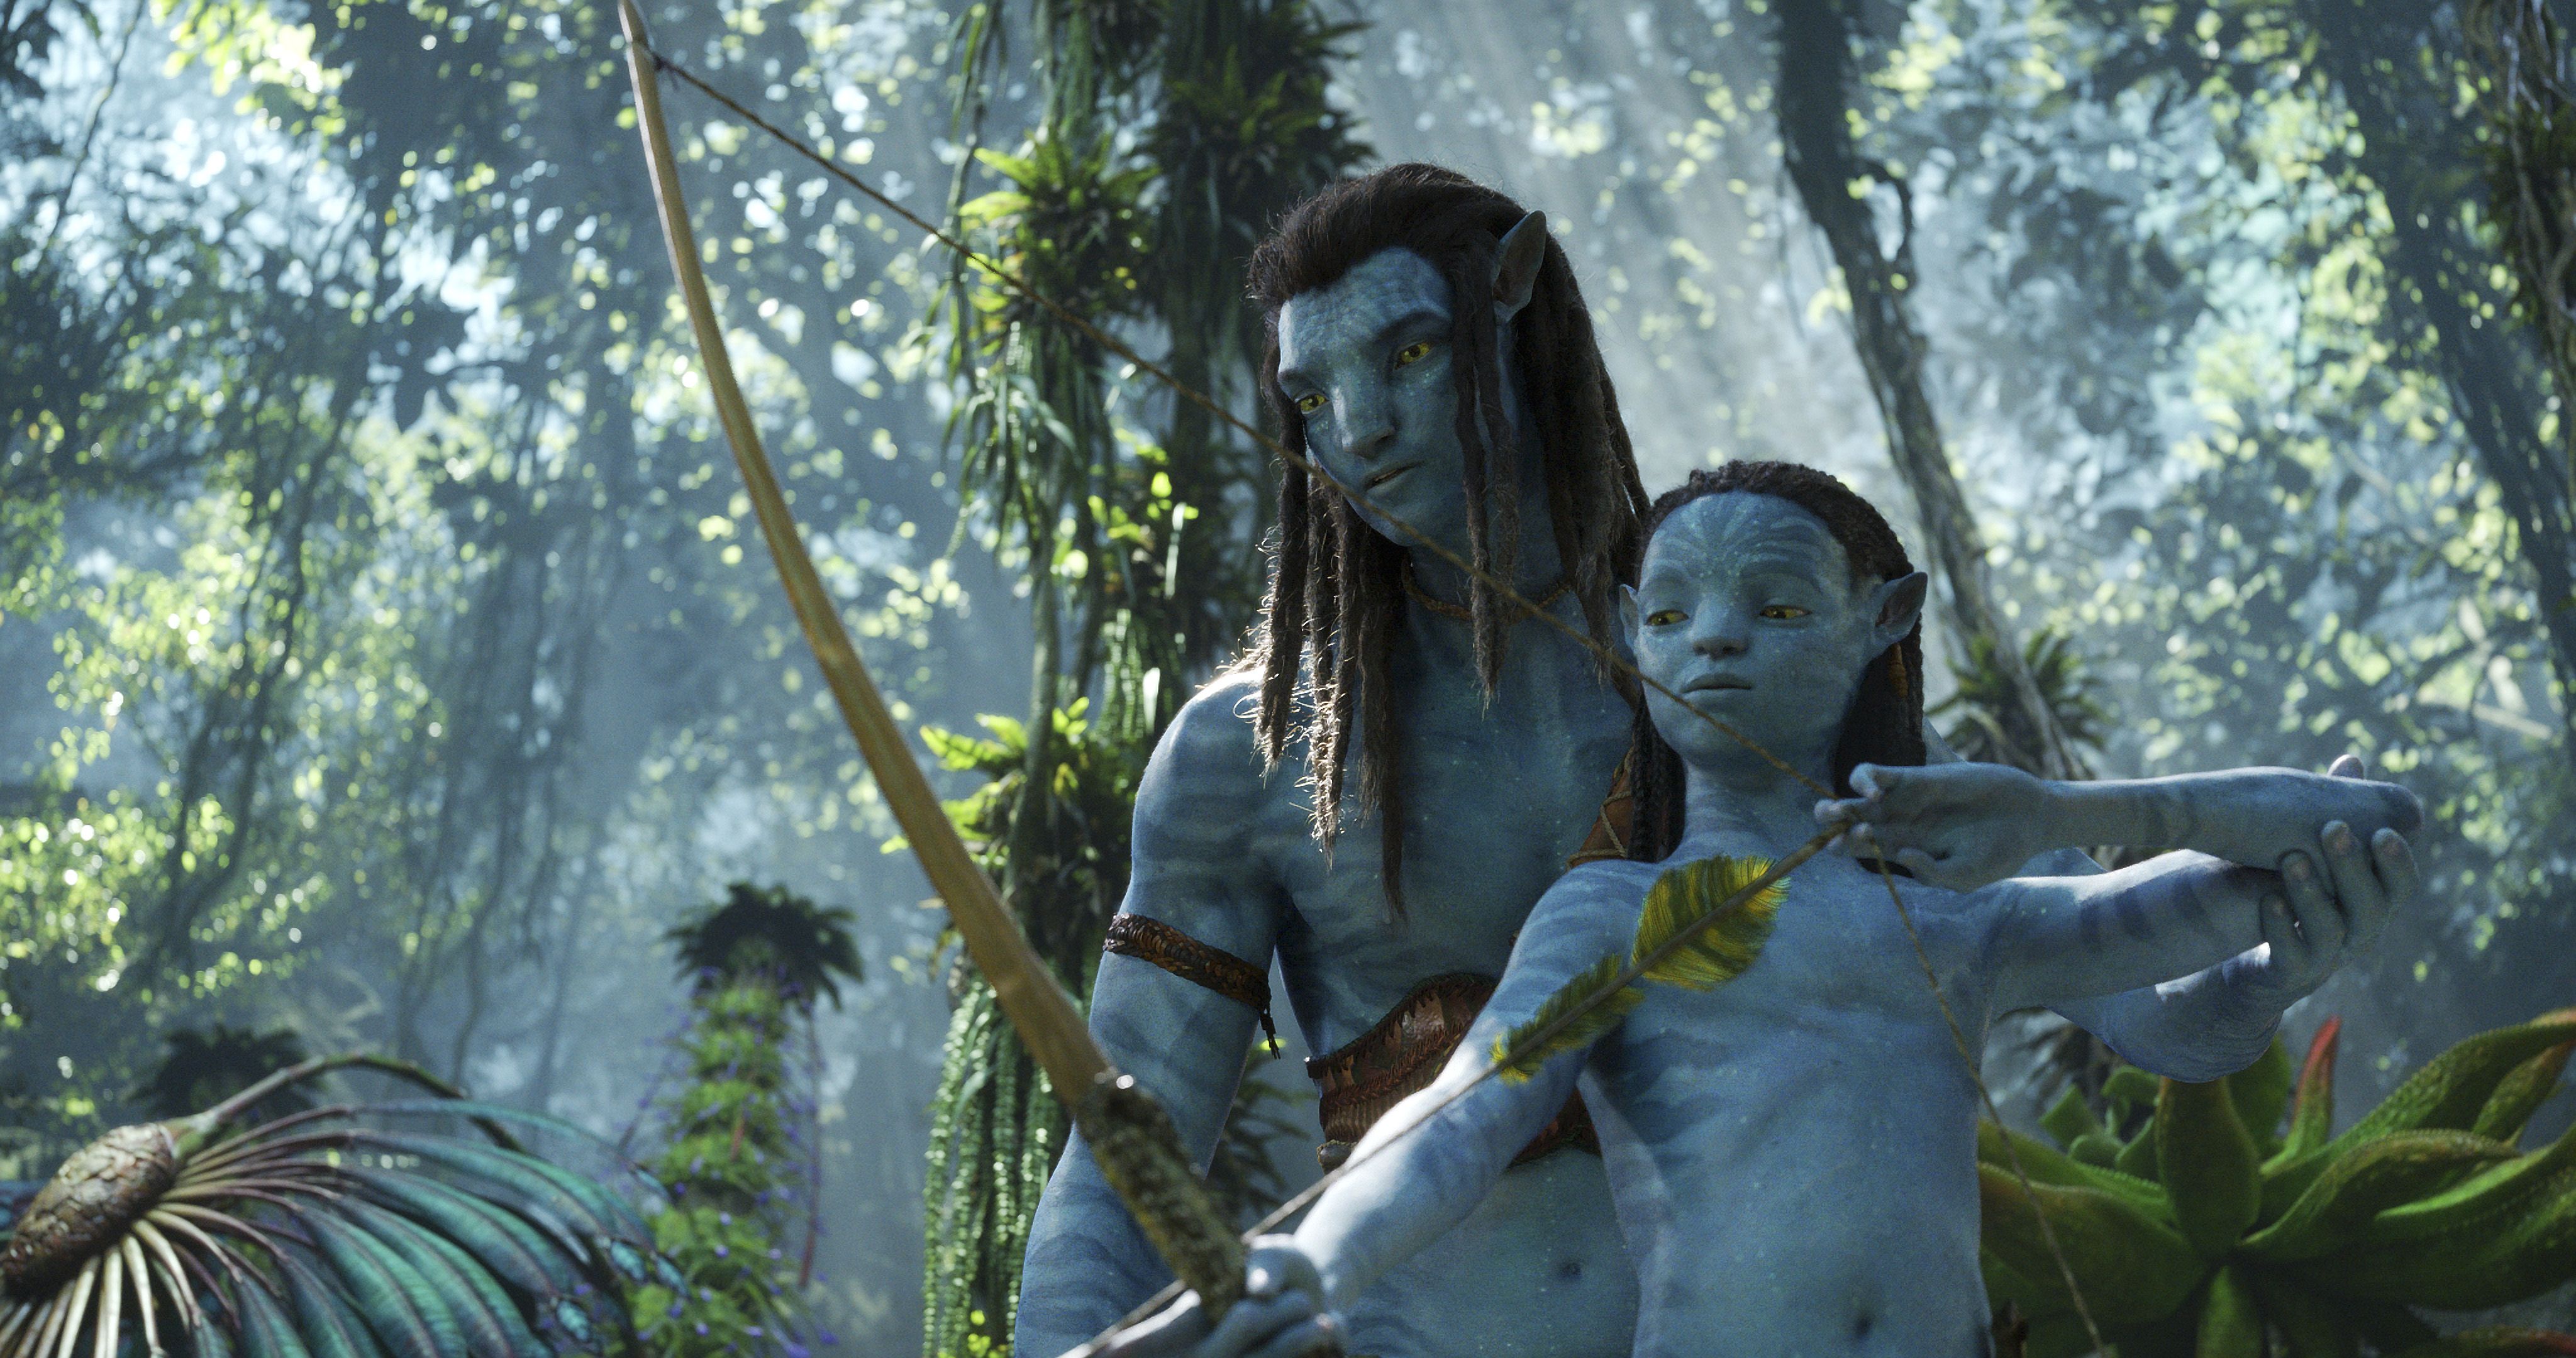 Disney Celebrates “Avatar Day” With New Trailer and More